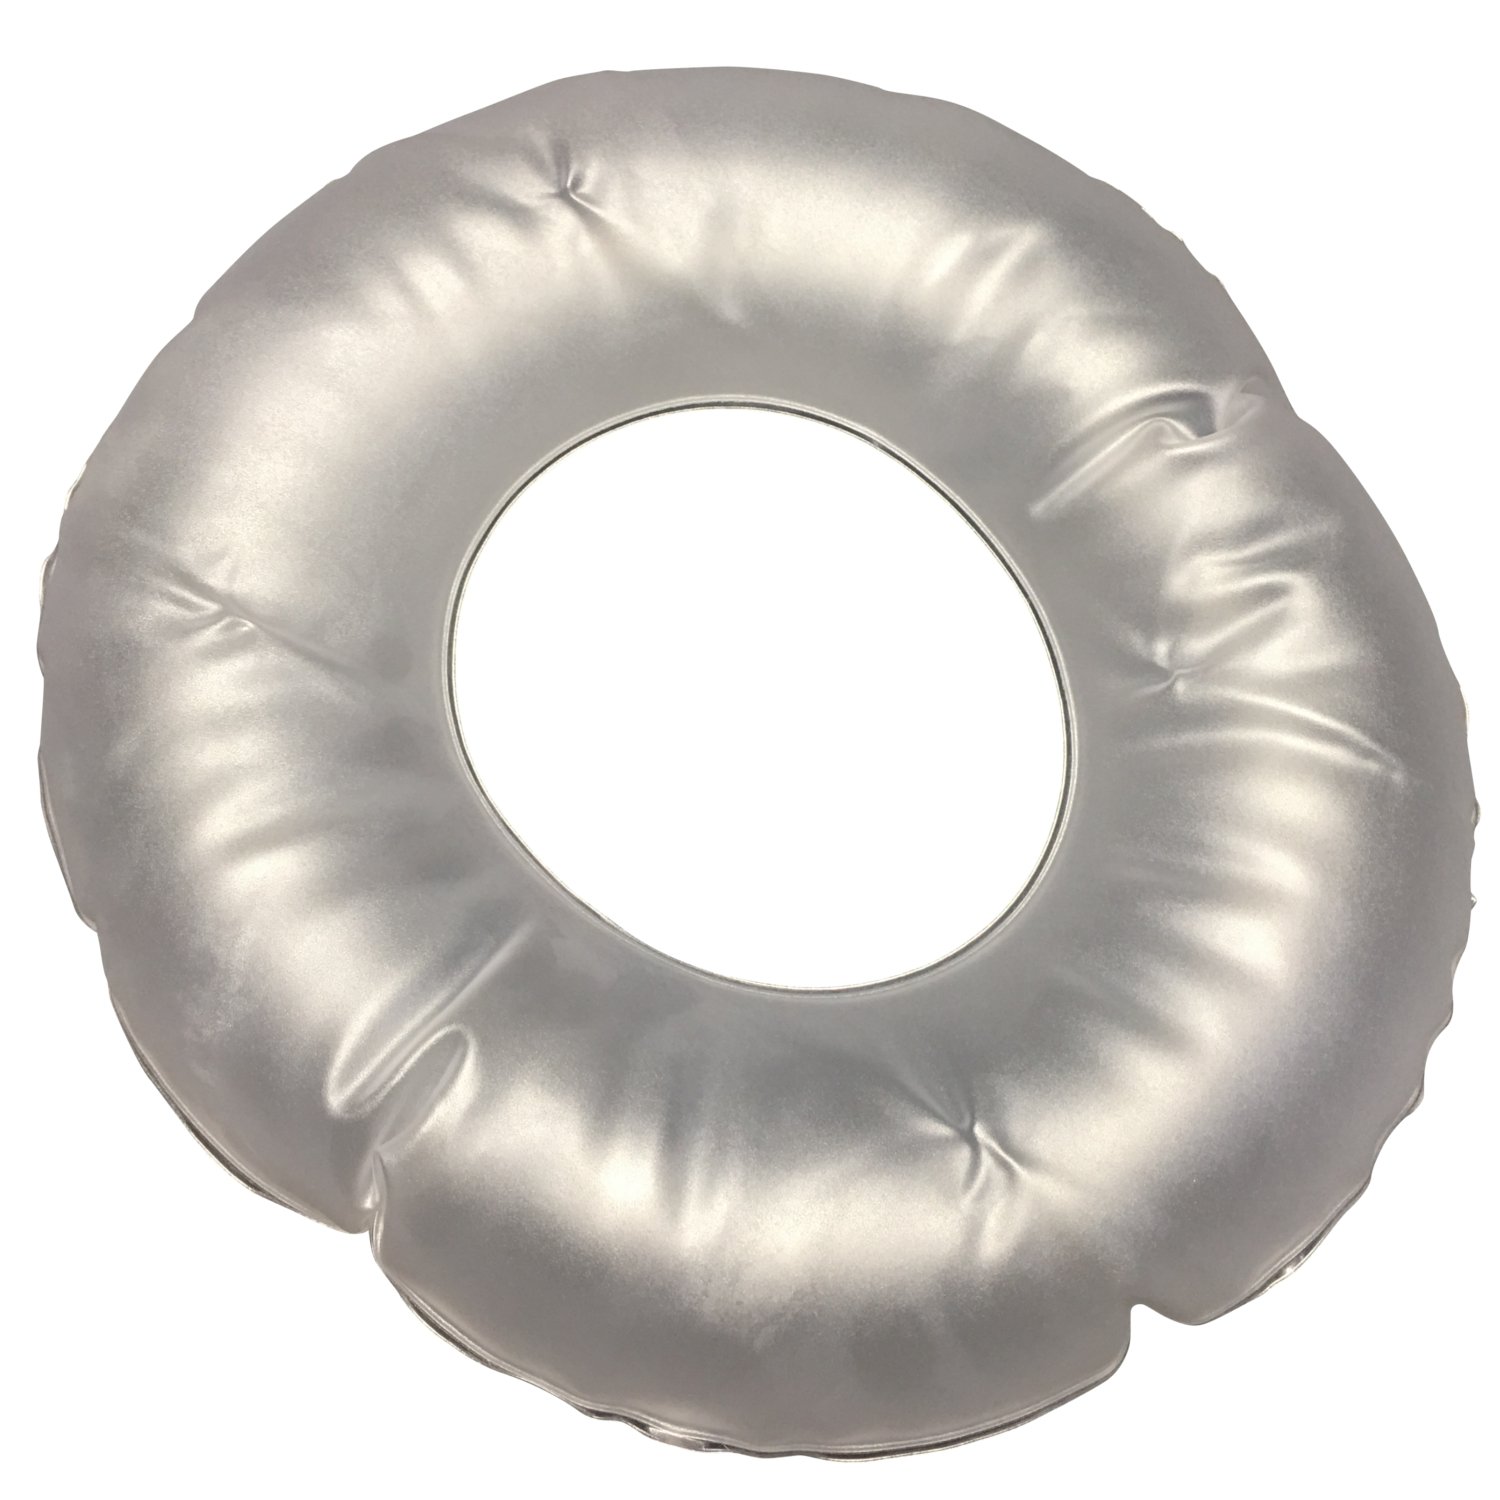 Inflatable Ring Support Pillow